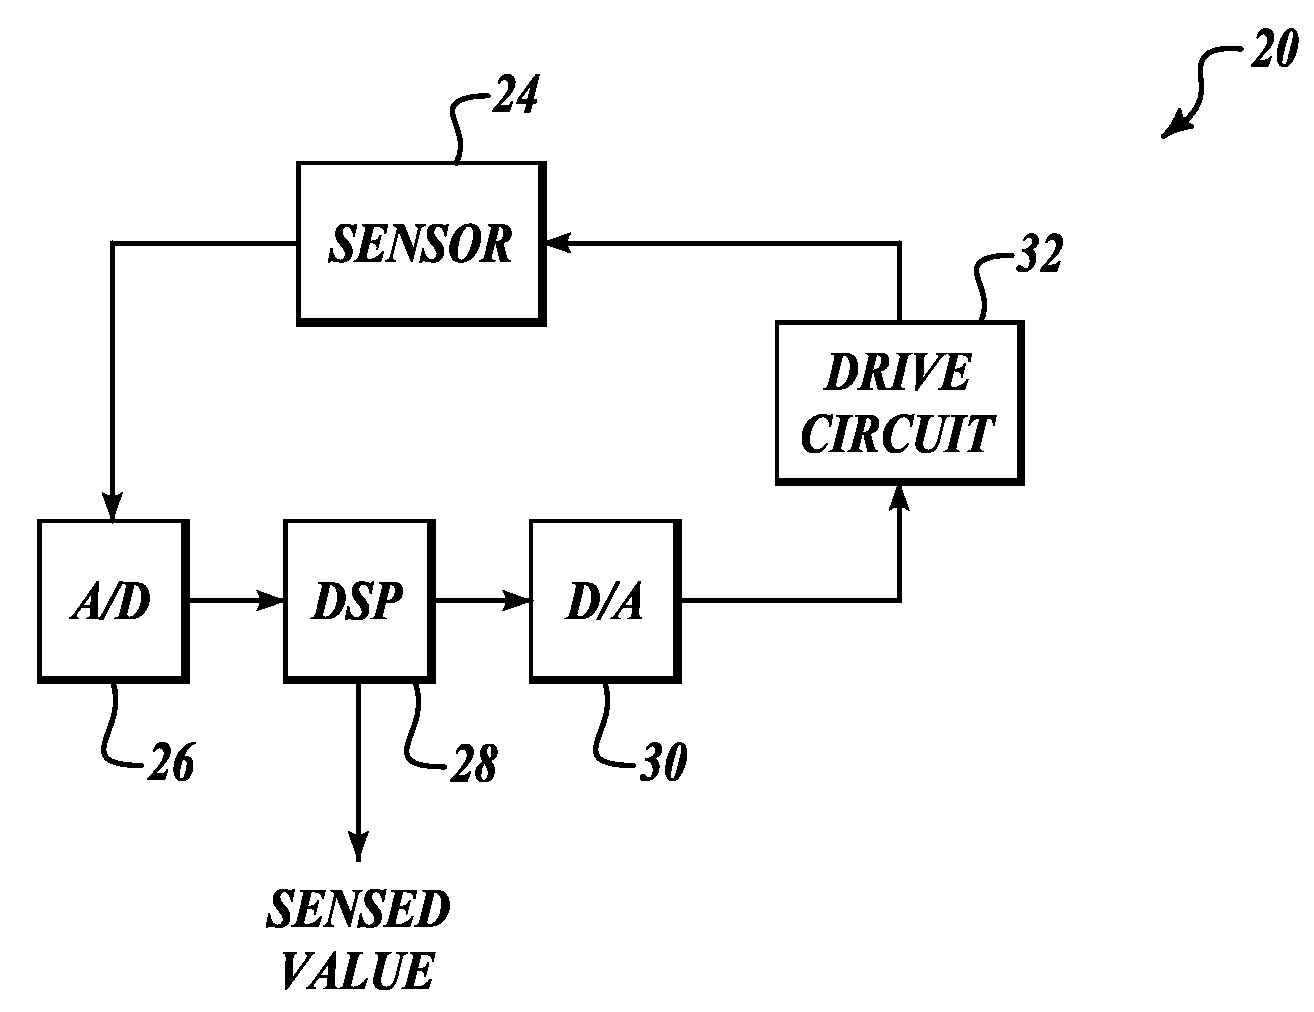 Systems and methods for improving data converters